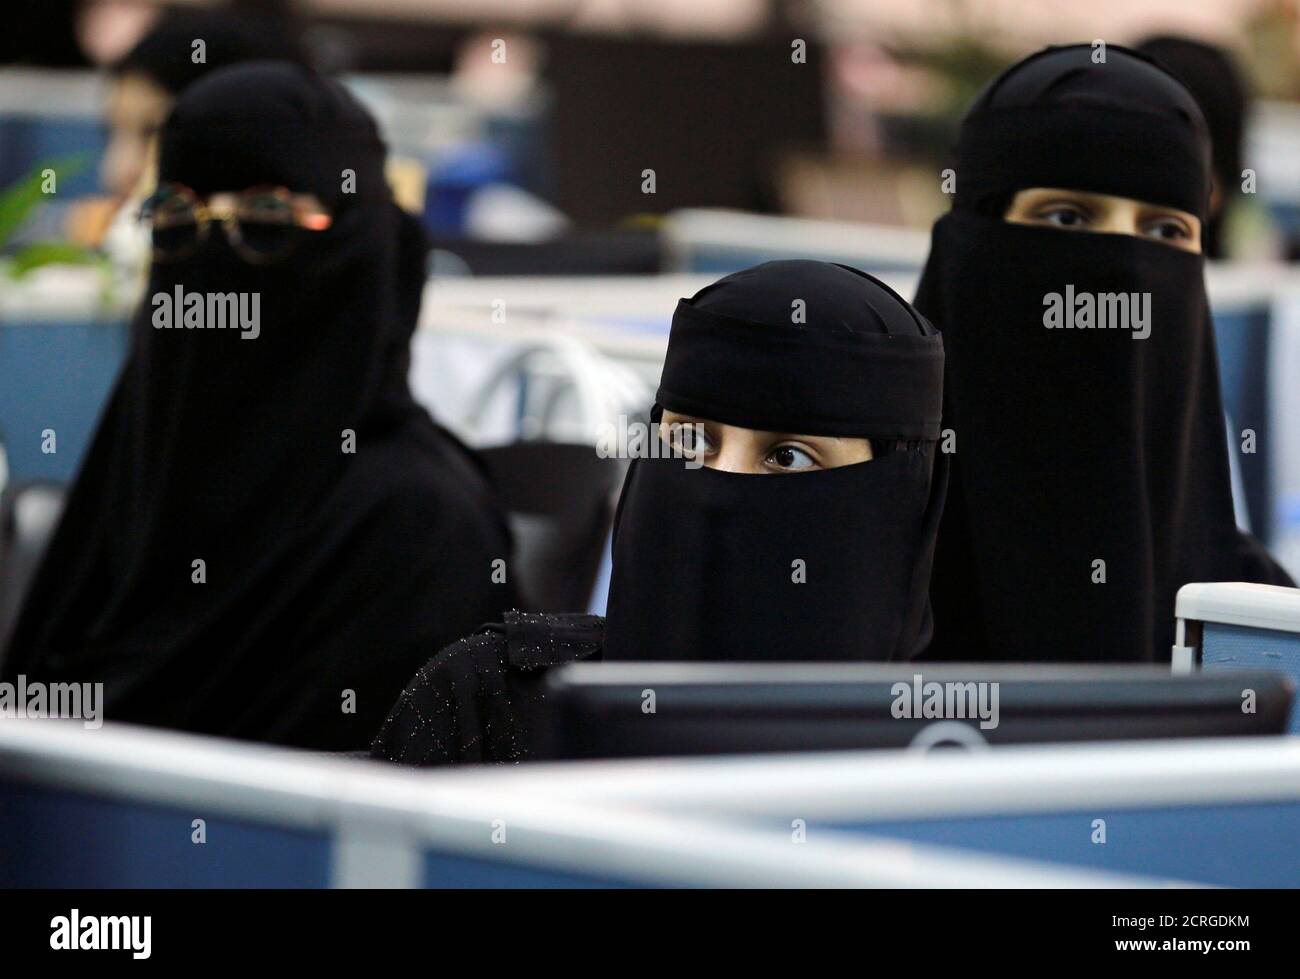 Women sit during a visit by First lady Melania Trump at GE All women  business process service center in Riyadh, Saudi Arabia, May 21, 2017.  REUTERS/Hamad I Mohammed Stock Photo - Alamy